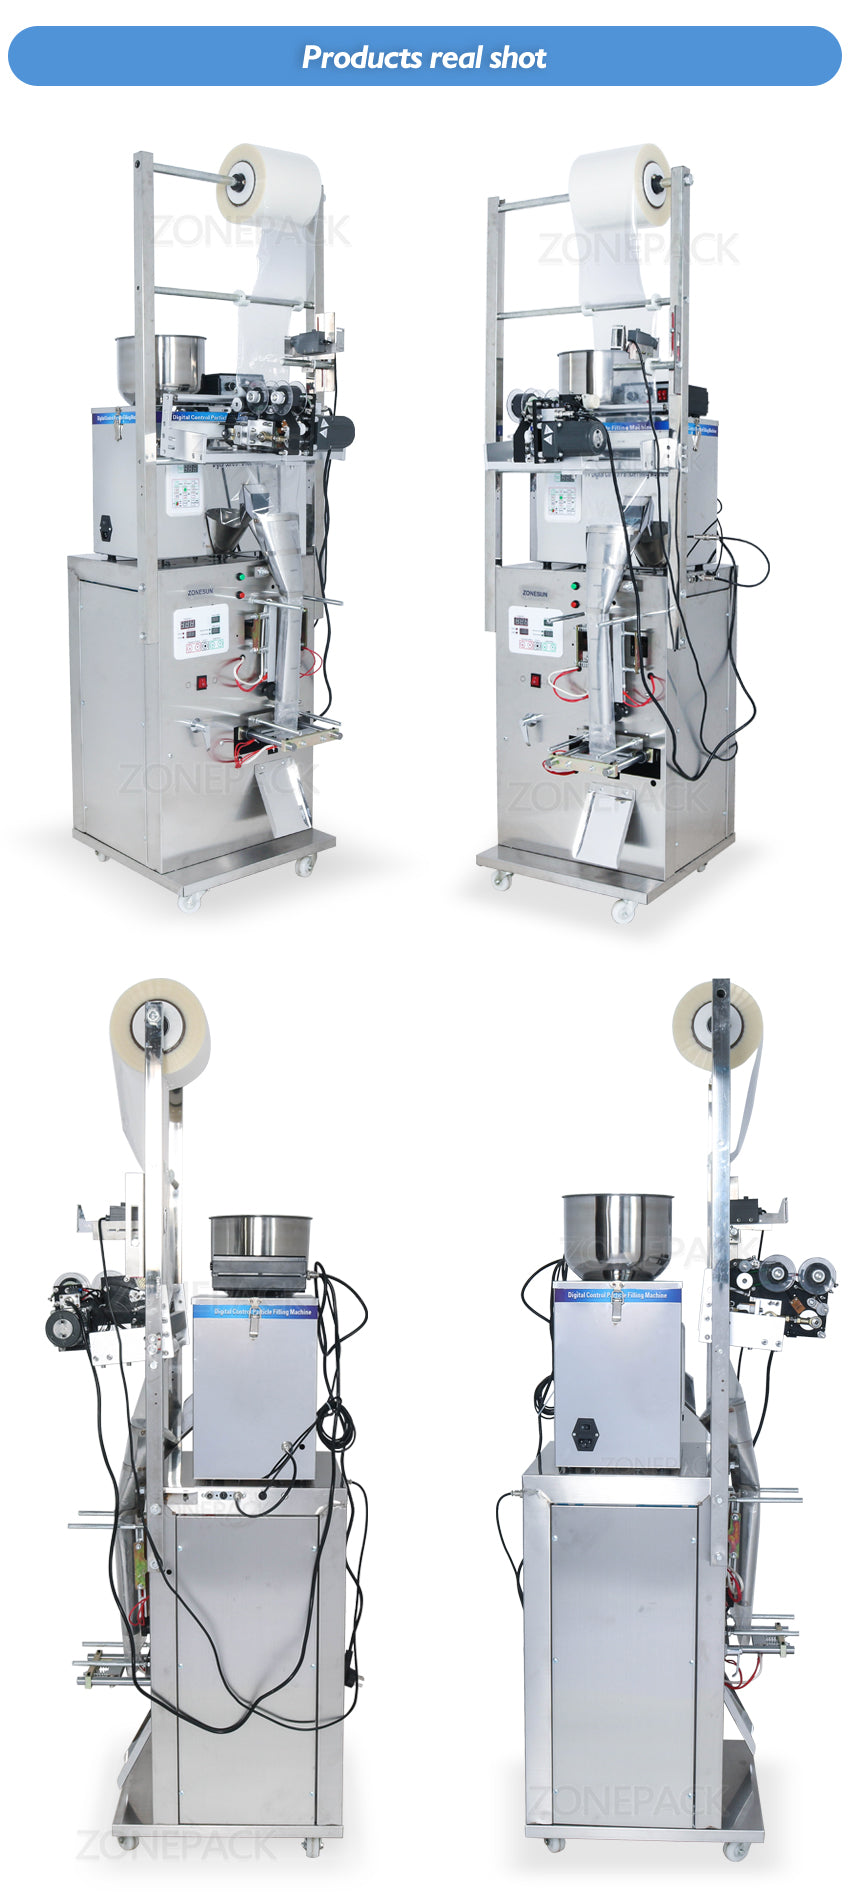 ZONESUN Grain Powder Automatic Filling and Sealing Machine Back Side Seal With Date Printer ZS-GZ5200